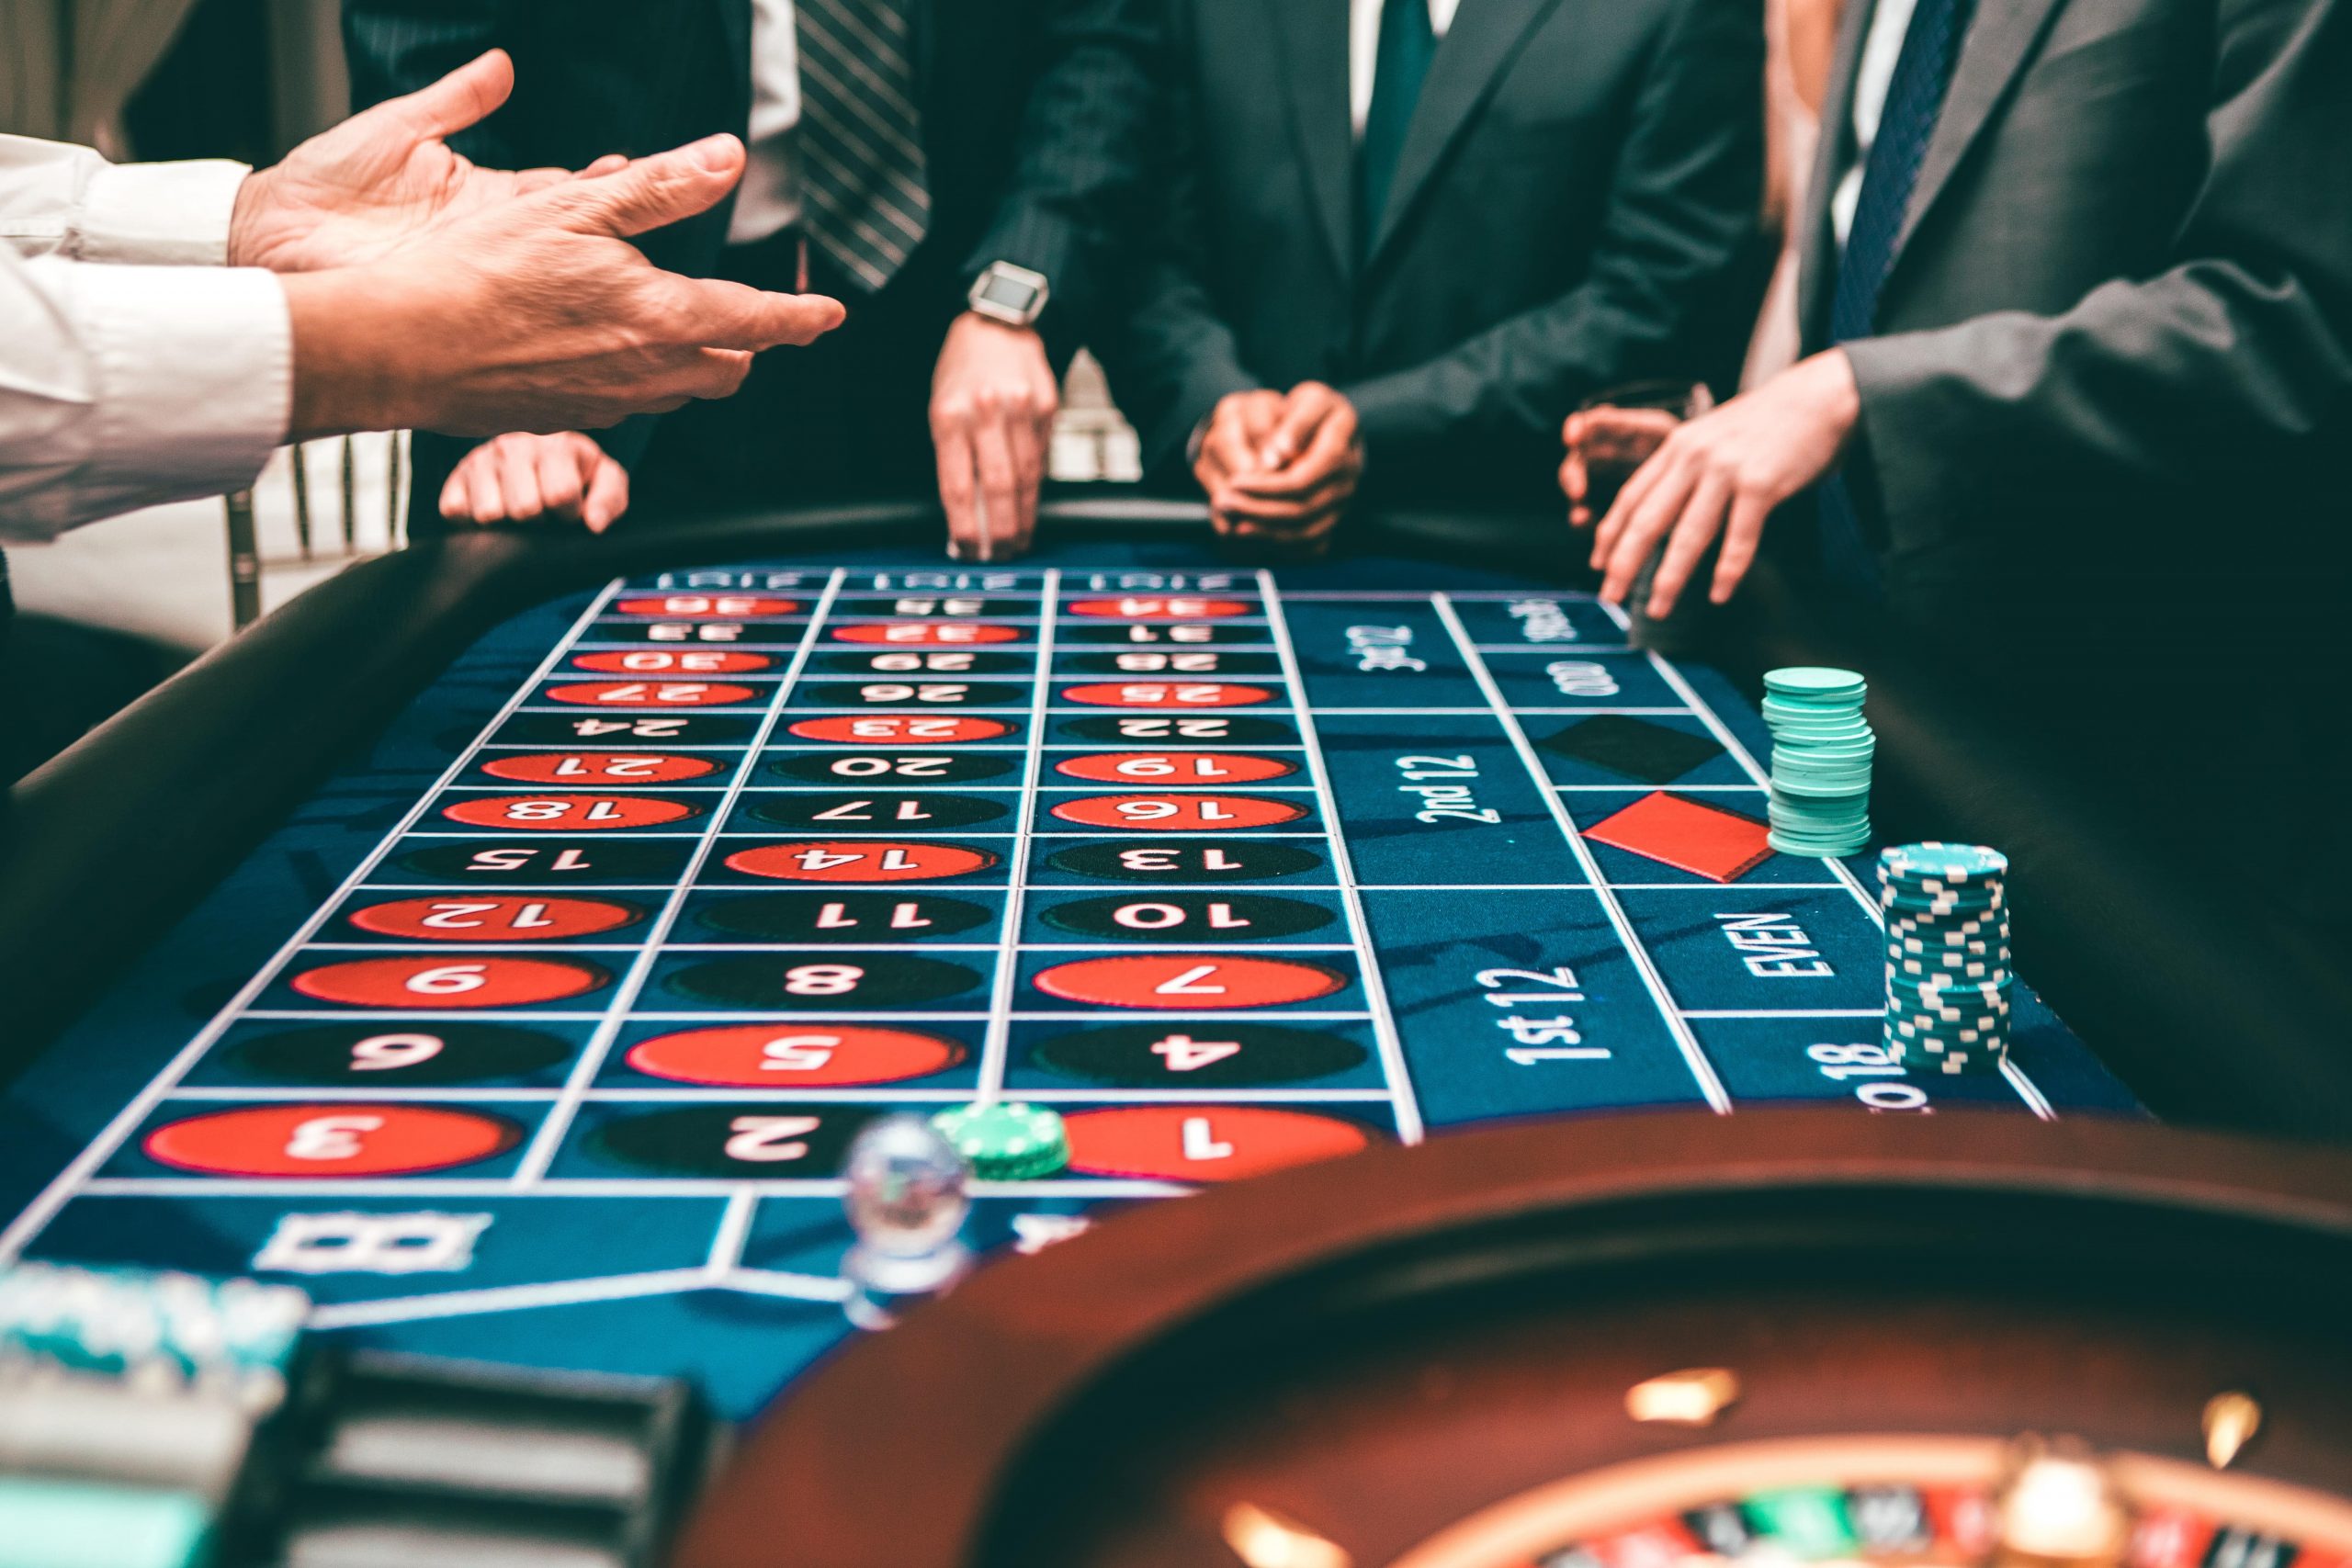 gamblers standing around a roulette table placing bets